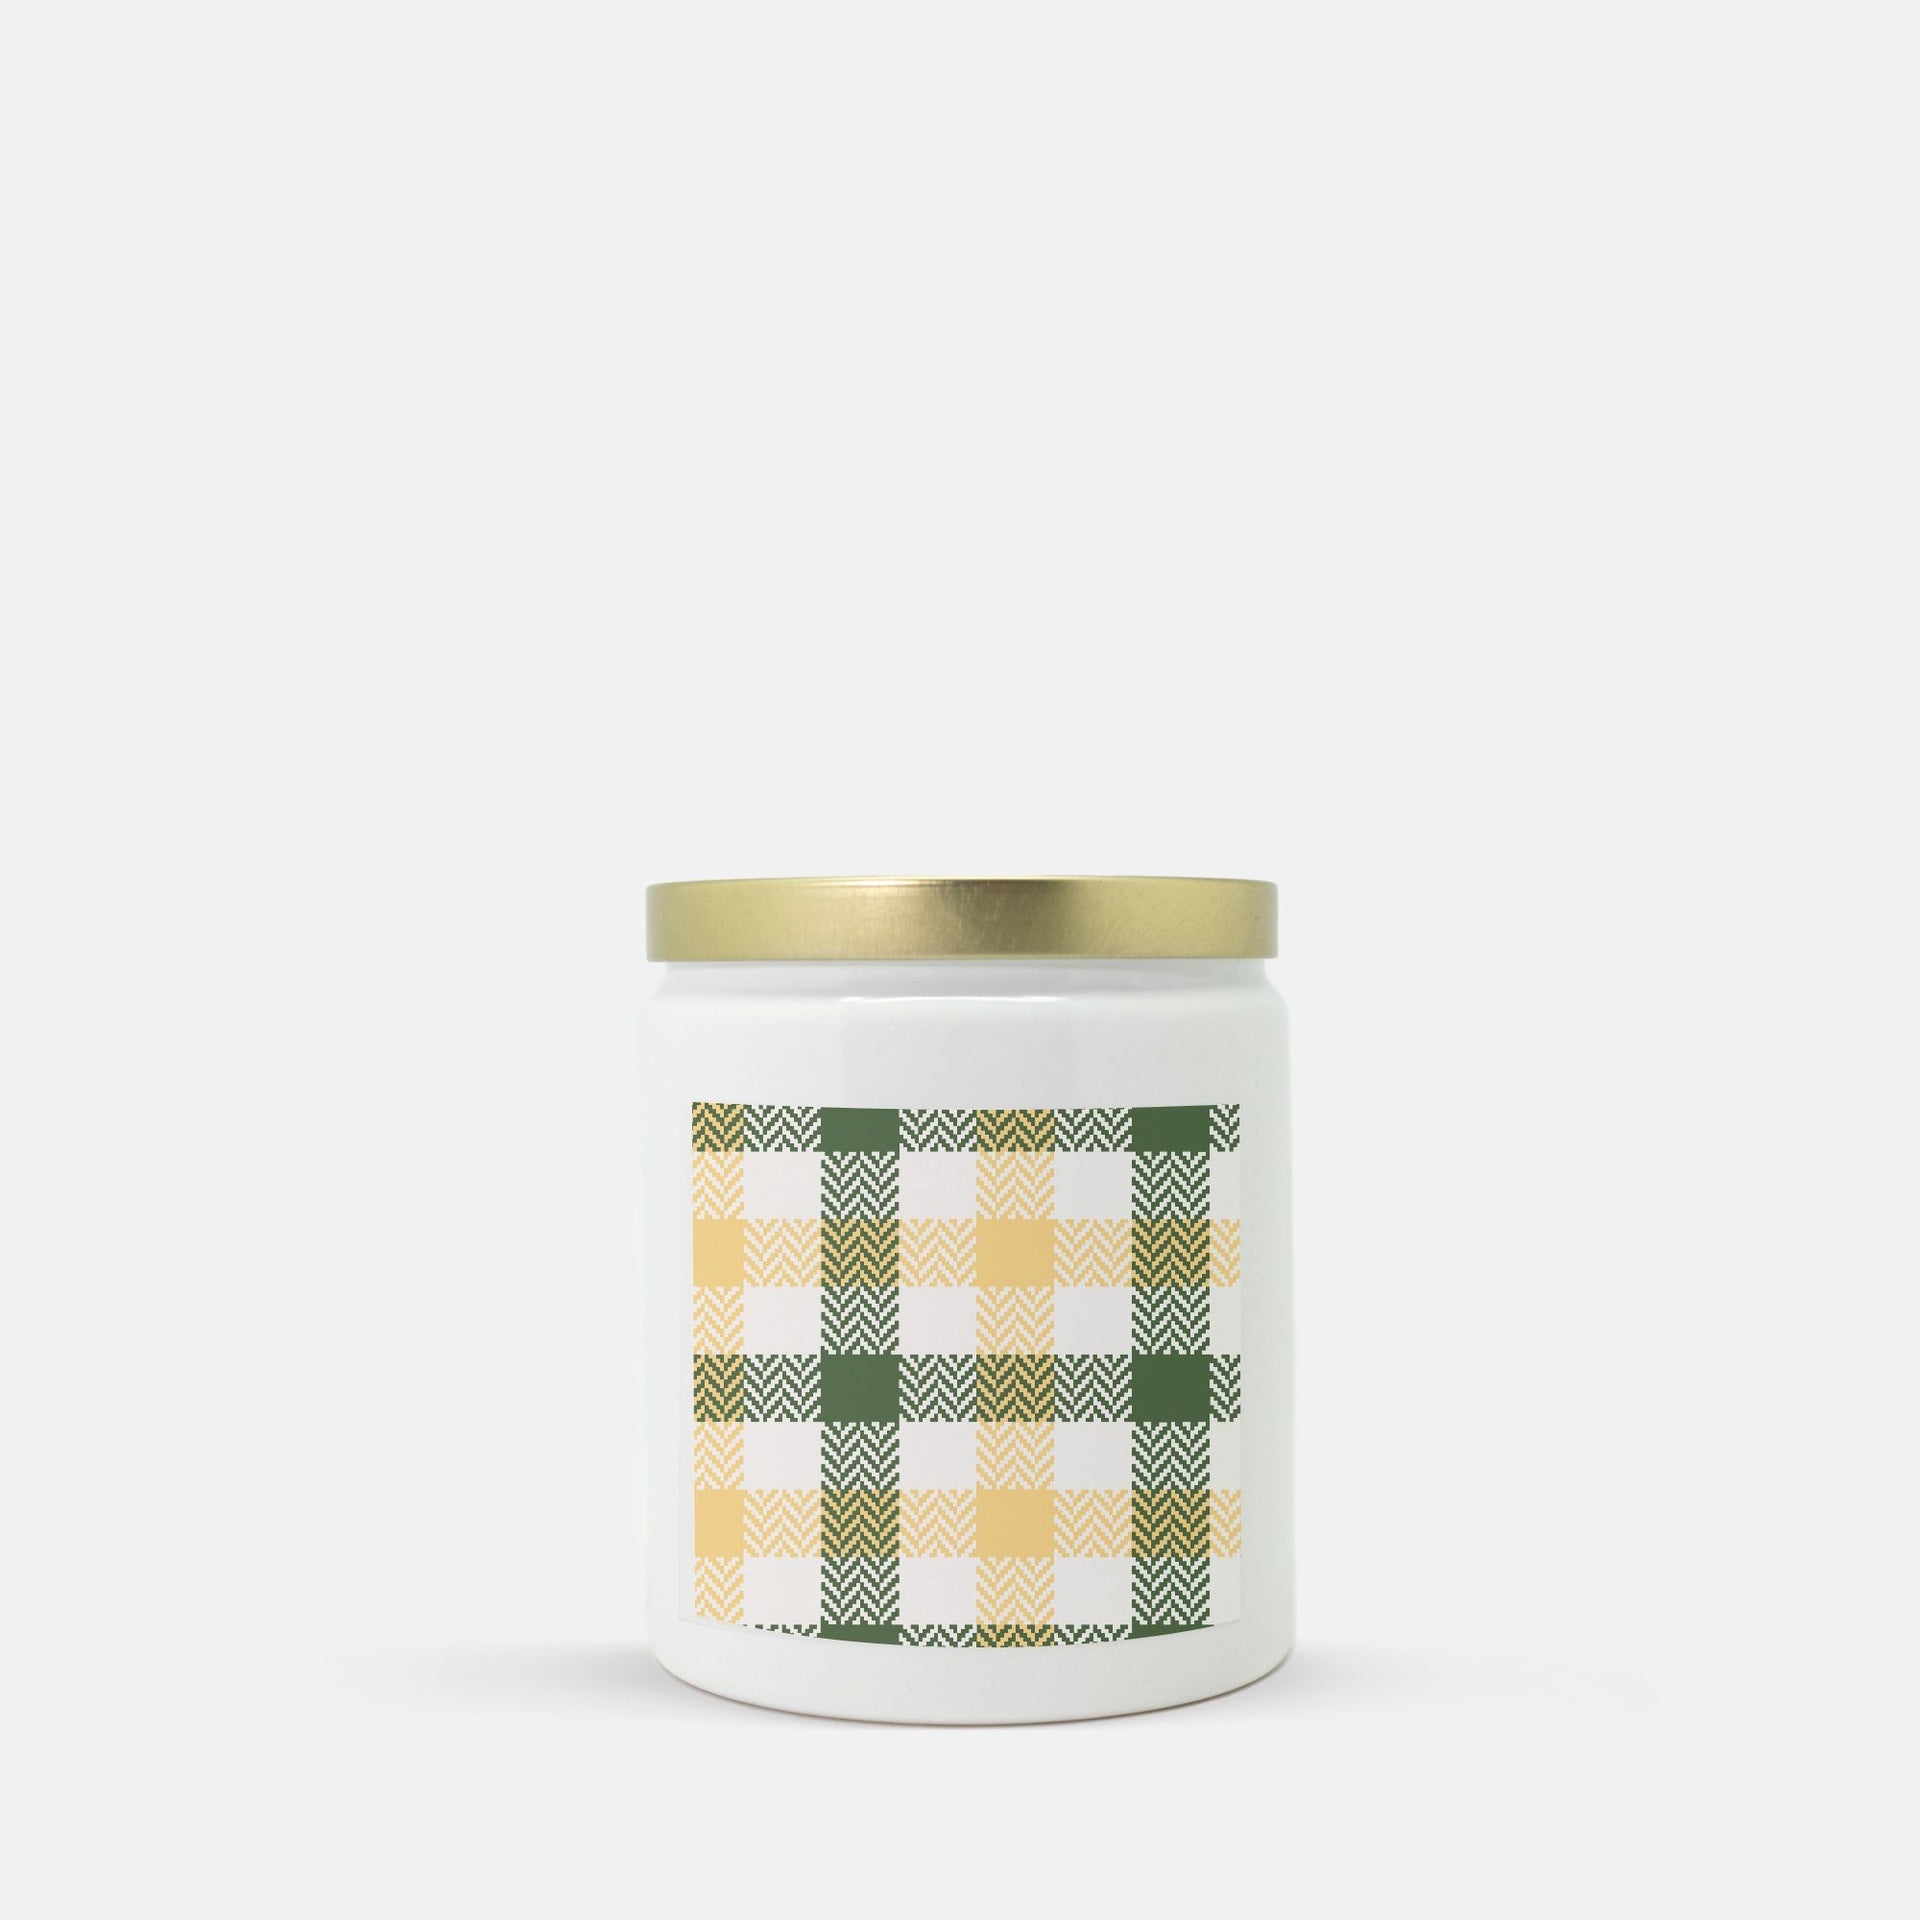 Lifestyle Details - Green & Yellow Plaid Ceramic Candle - Gold Lid - Macintosh